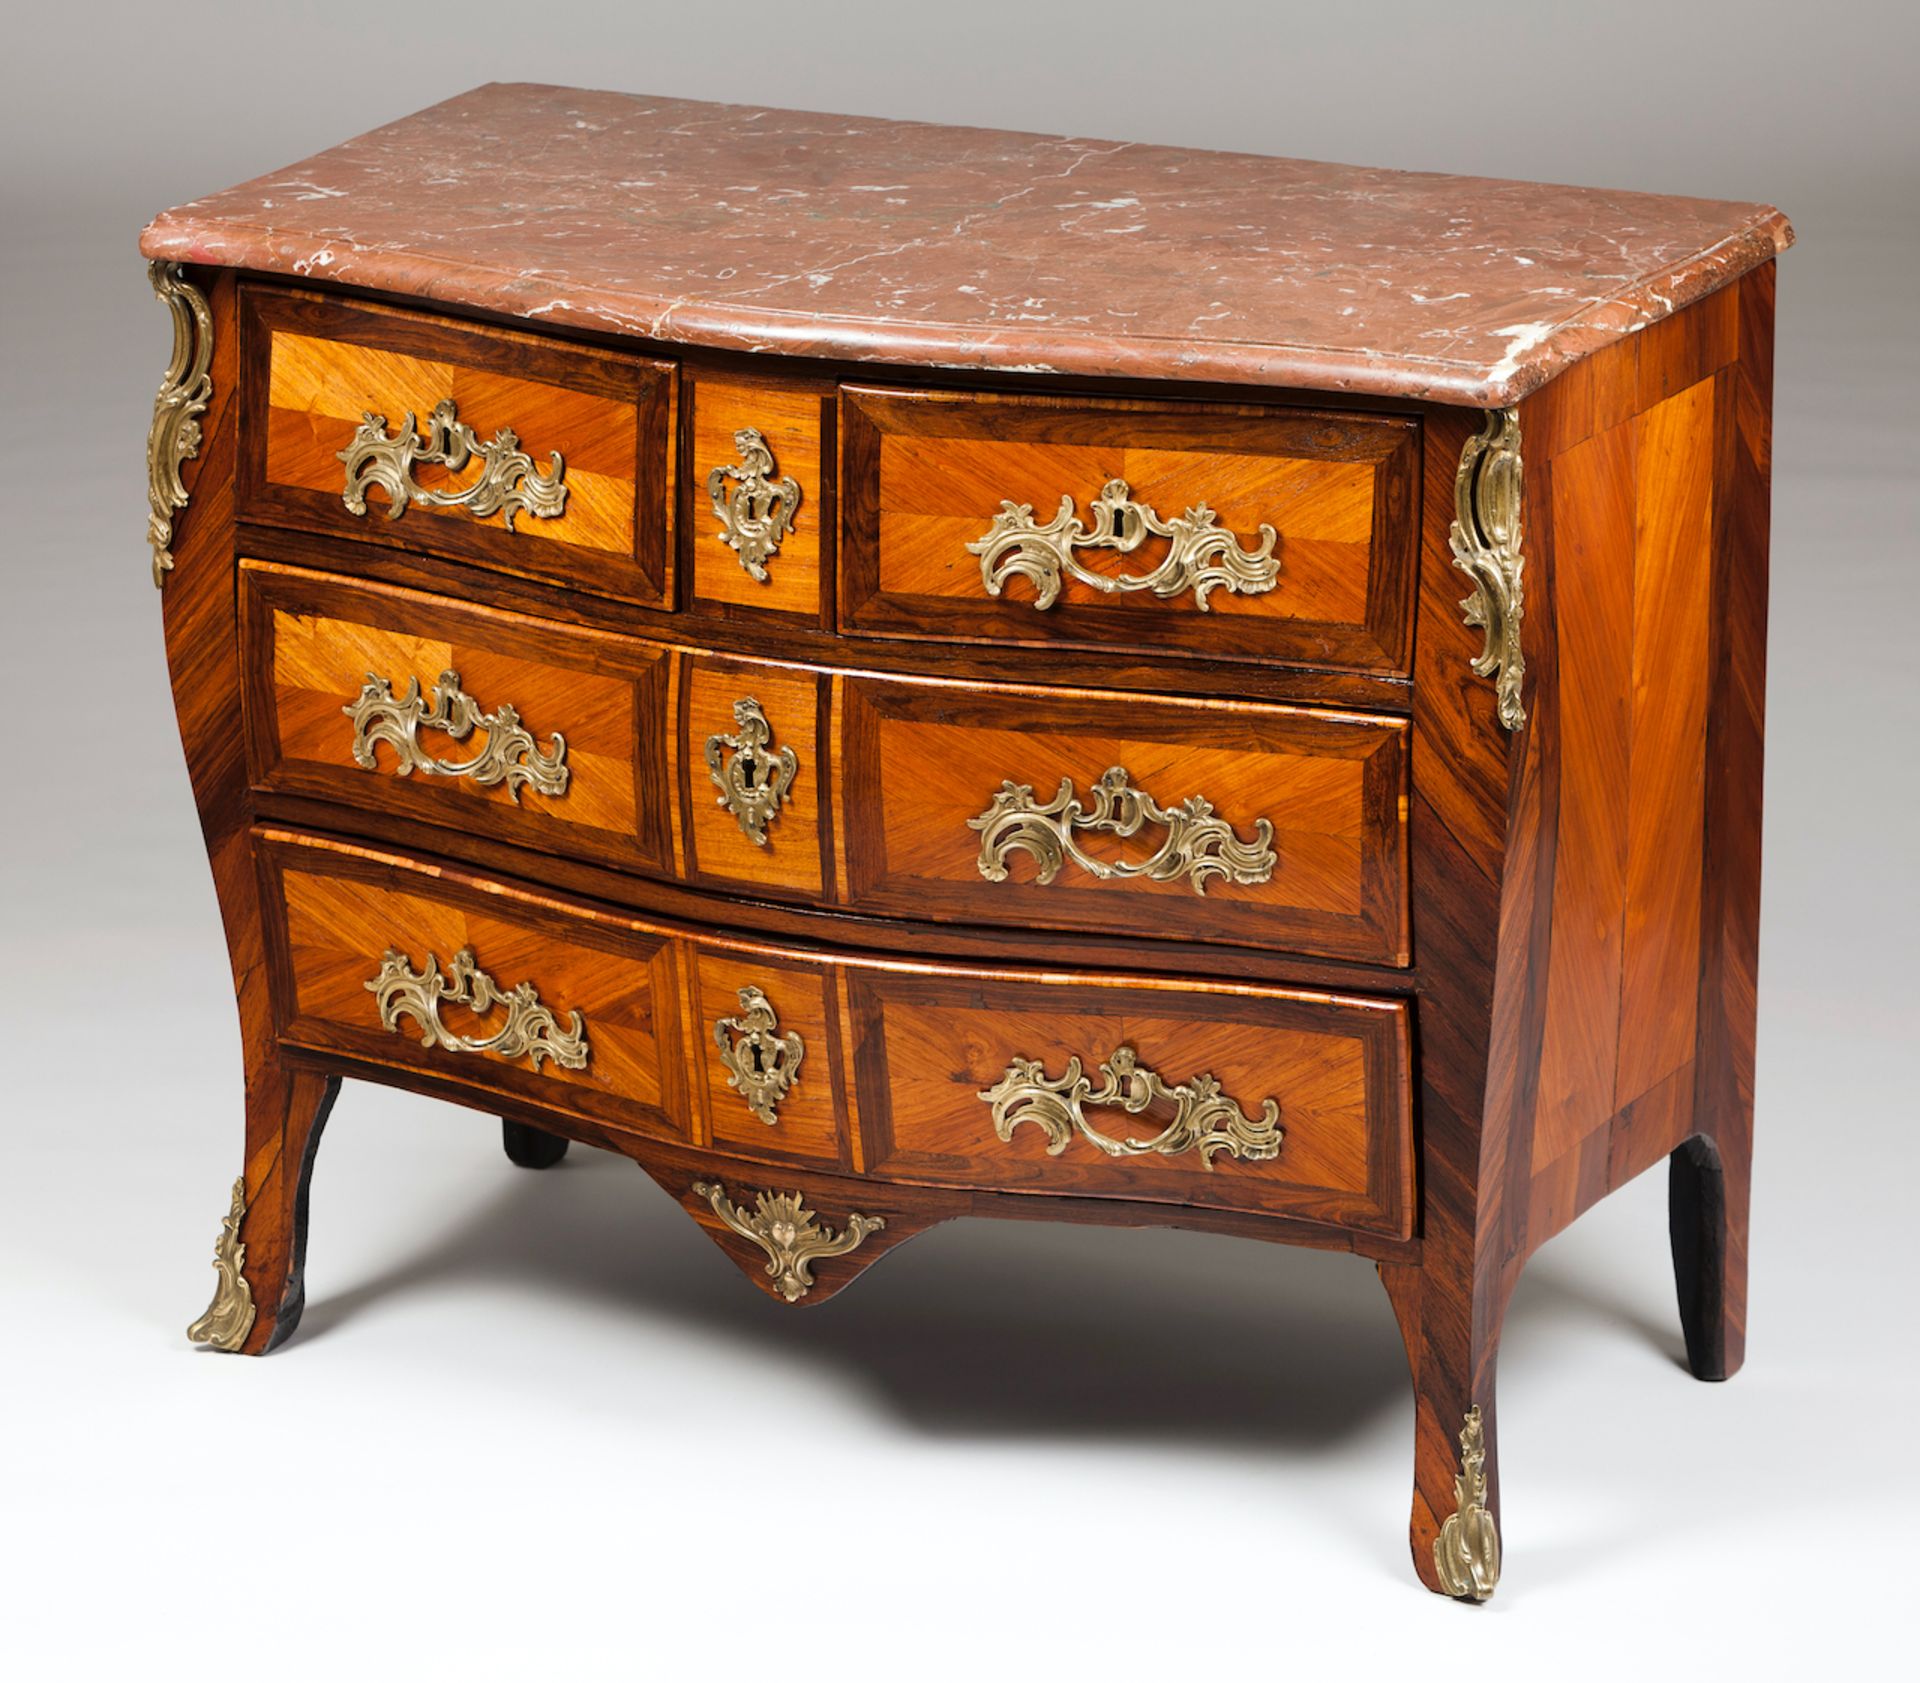 A Louis XV commodeRosewood and jacaranda marquetry workMarble top with applied raised and gilt